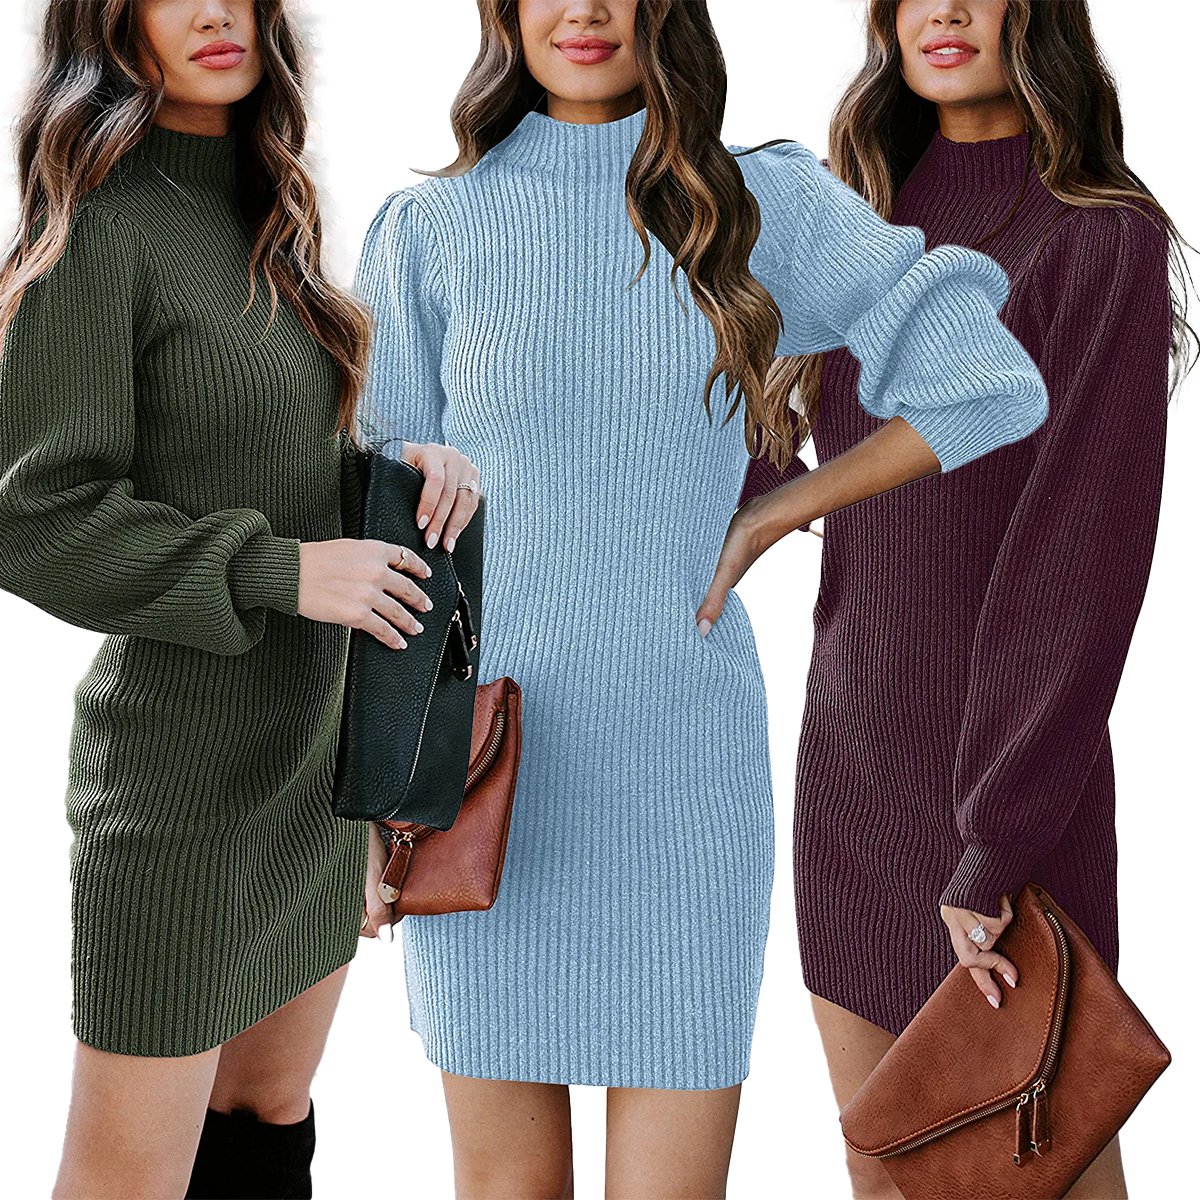 13 Sweater Dresses for Winter Travel Under $50